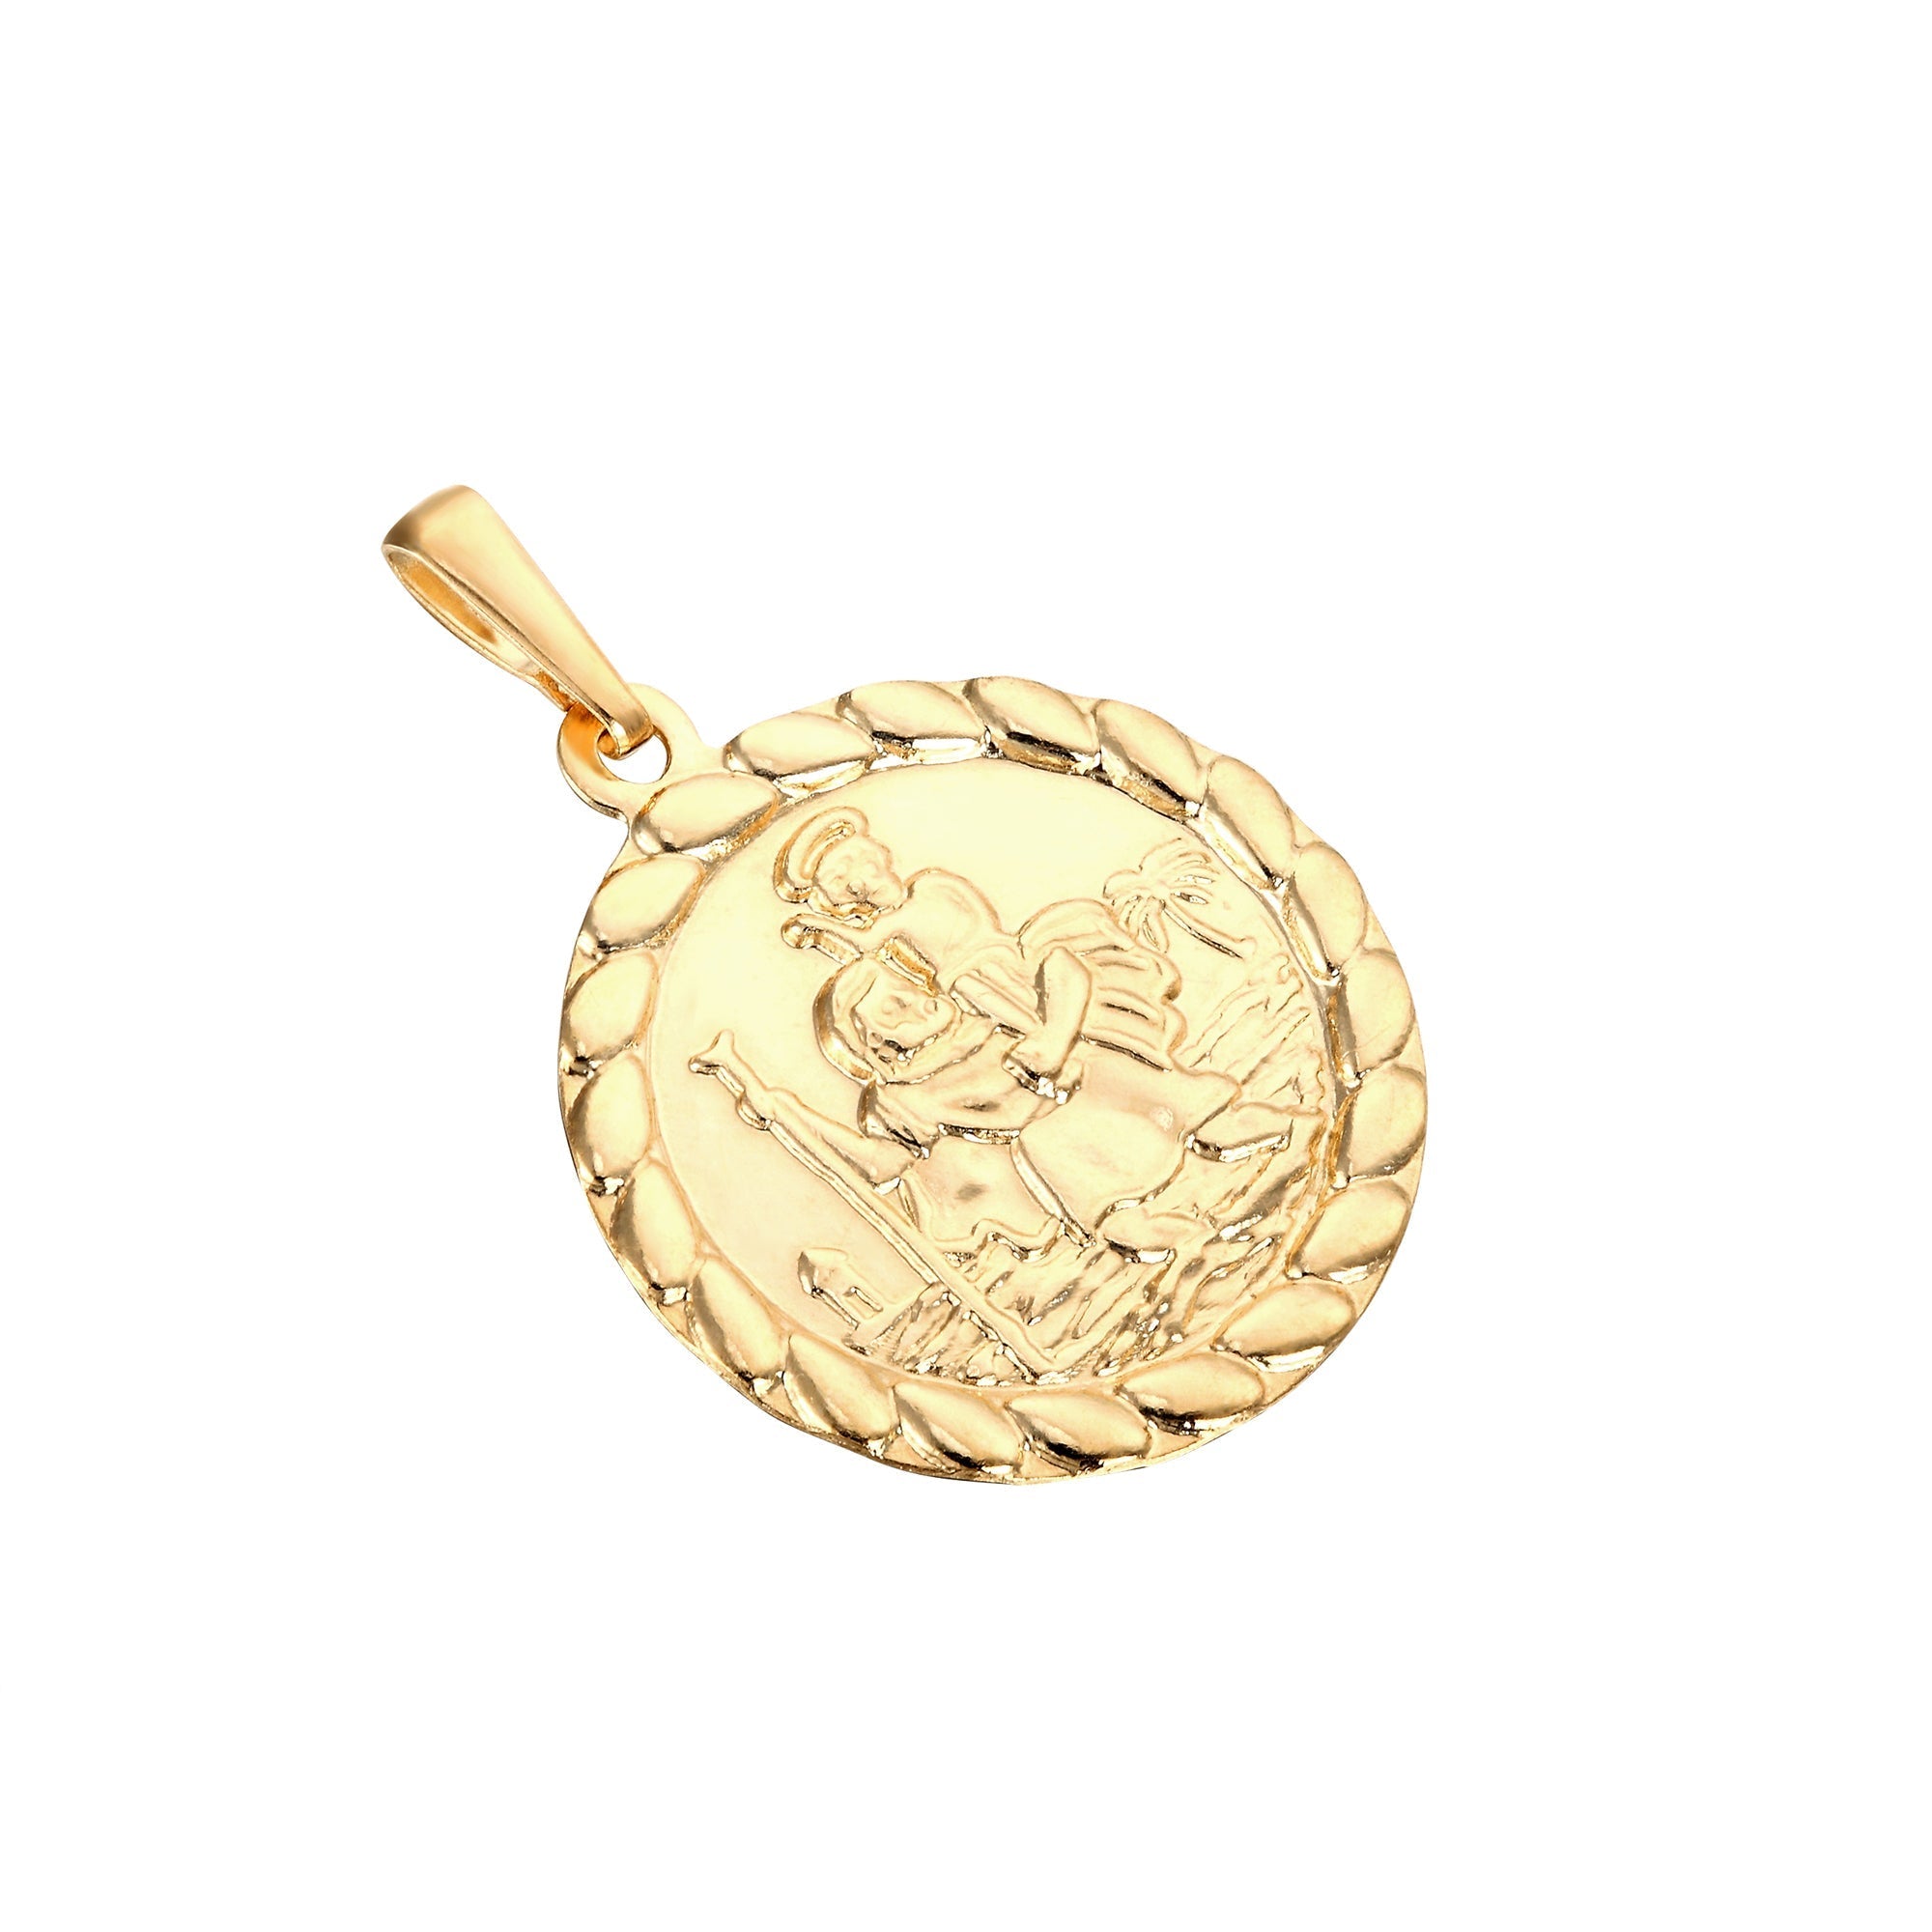 Alexander Castle Solid 9ct Gold St Christopher Pendant Medal for Women Men  Boys Girls - PENDANT ONLY with Jewellery Gift Box - 'SAINT CHRISTOPHER  PROTECT US' Engraving : Amazon.co.uk: Fashion